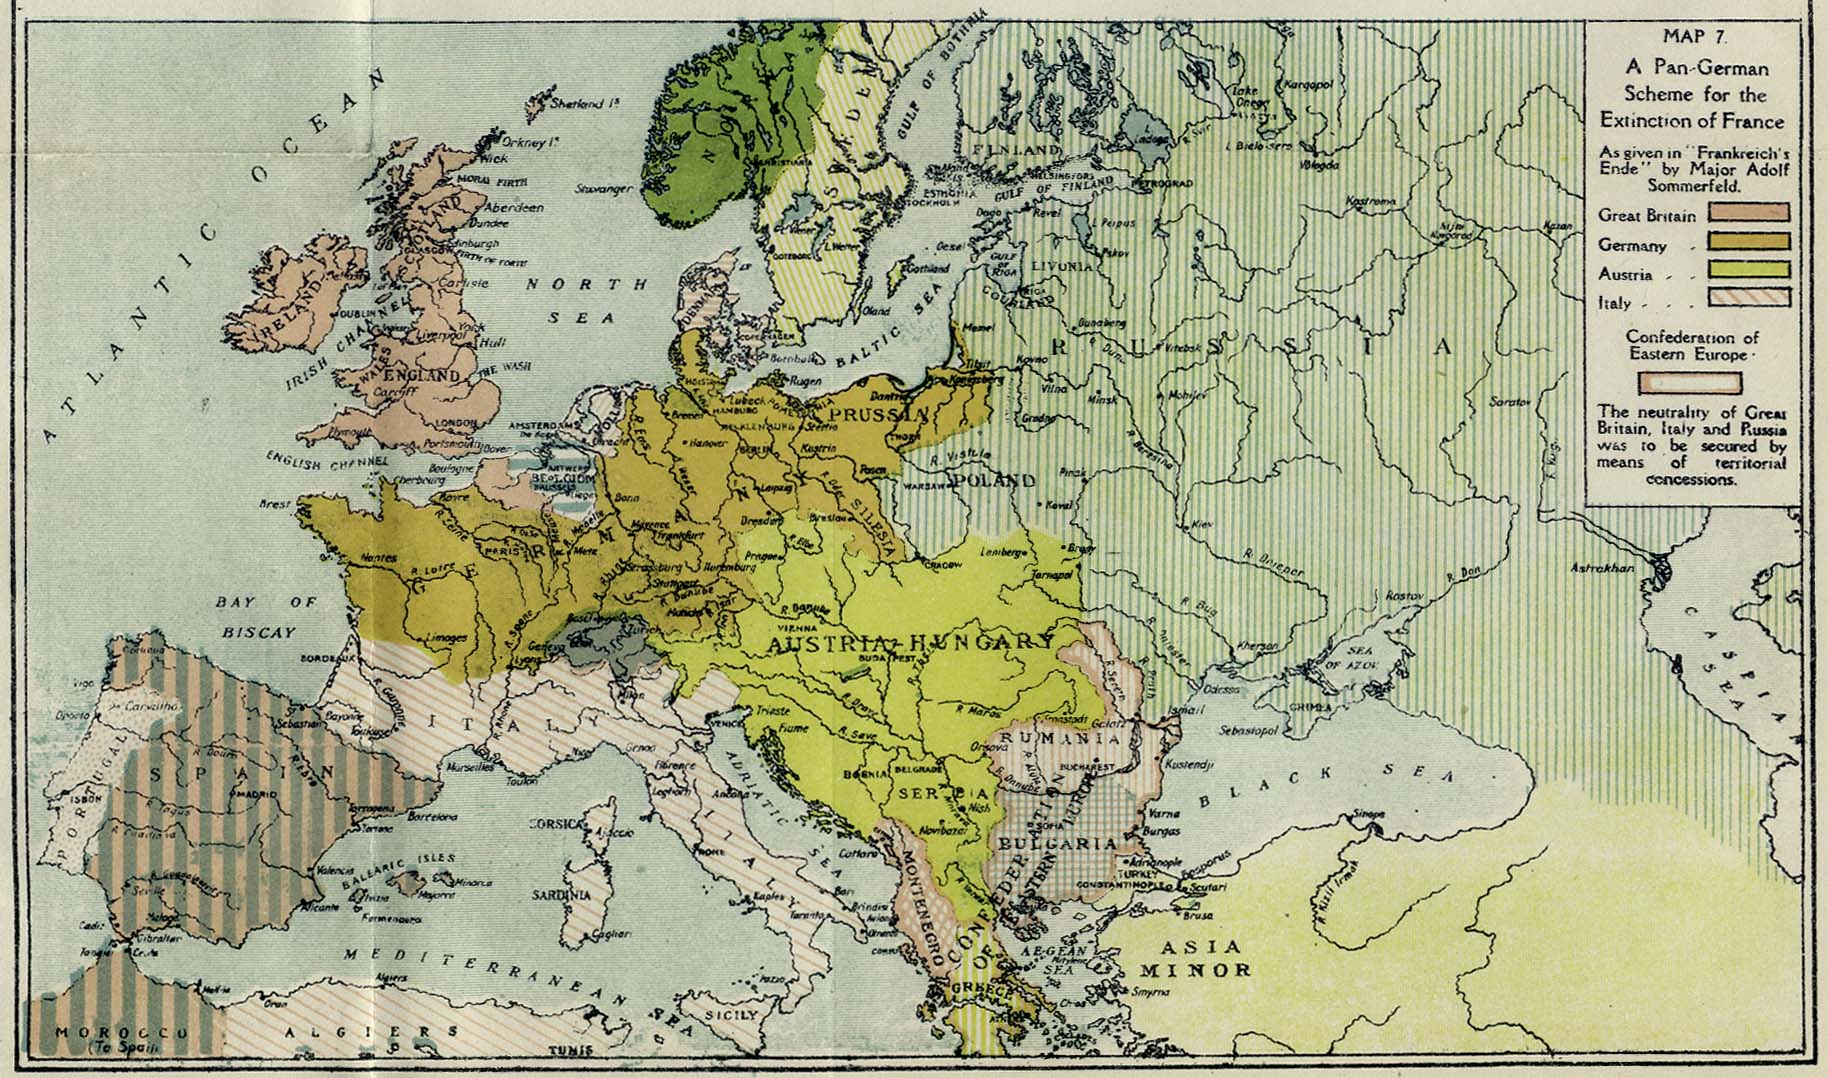 ext_of_france_map7_1918.jpg